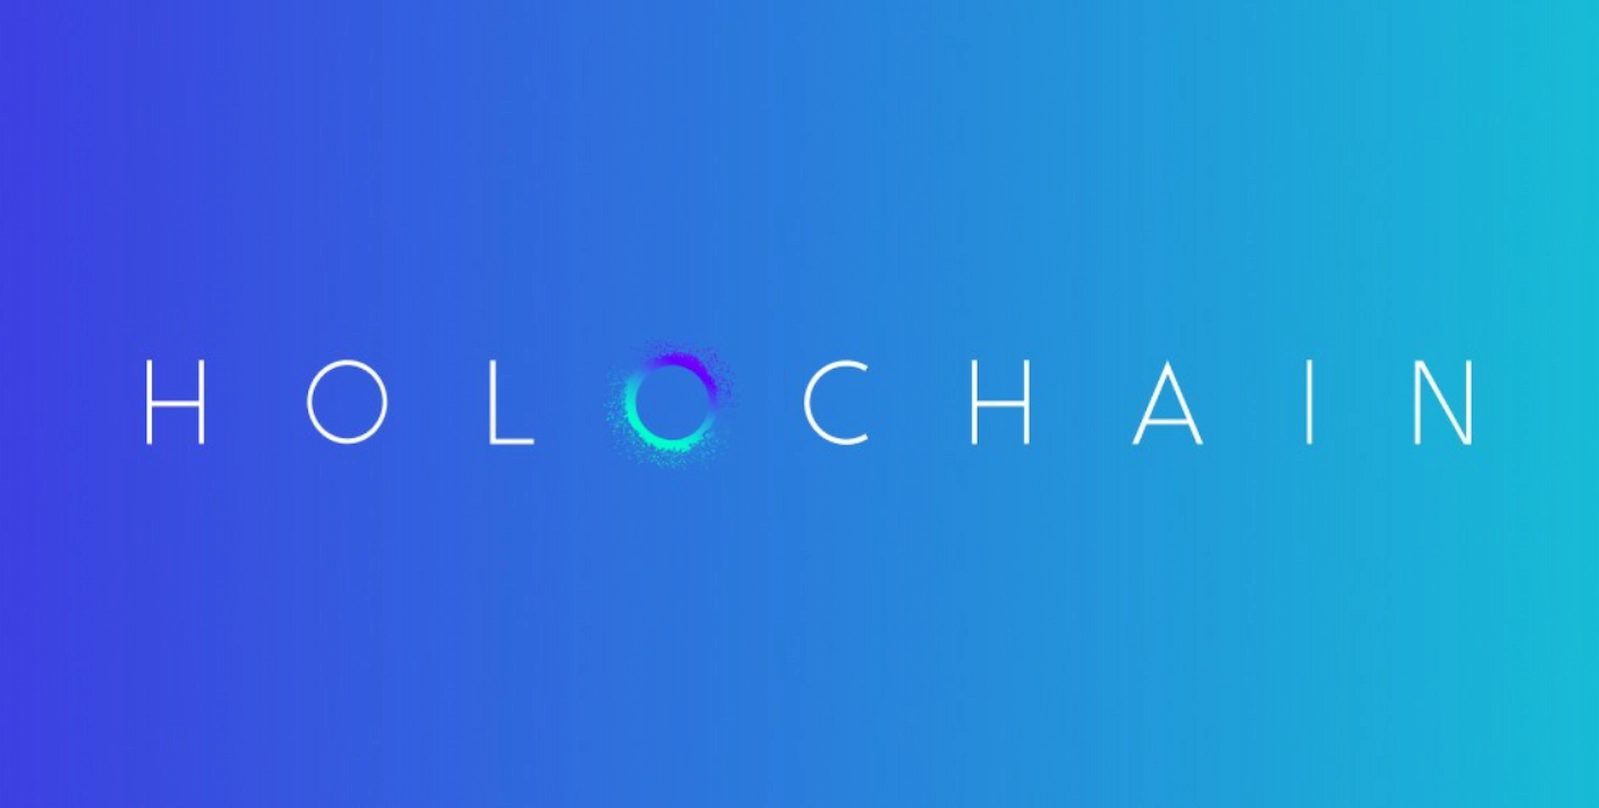 USA1 - Holochain - A Framework For Distributed Applications - Google Patents